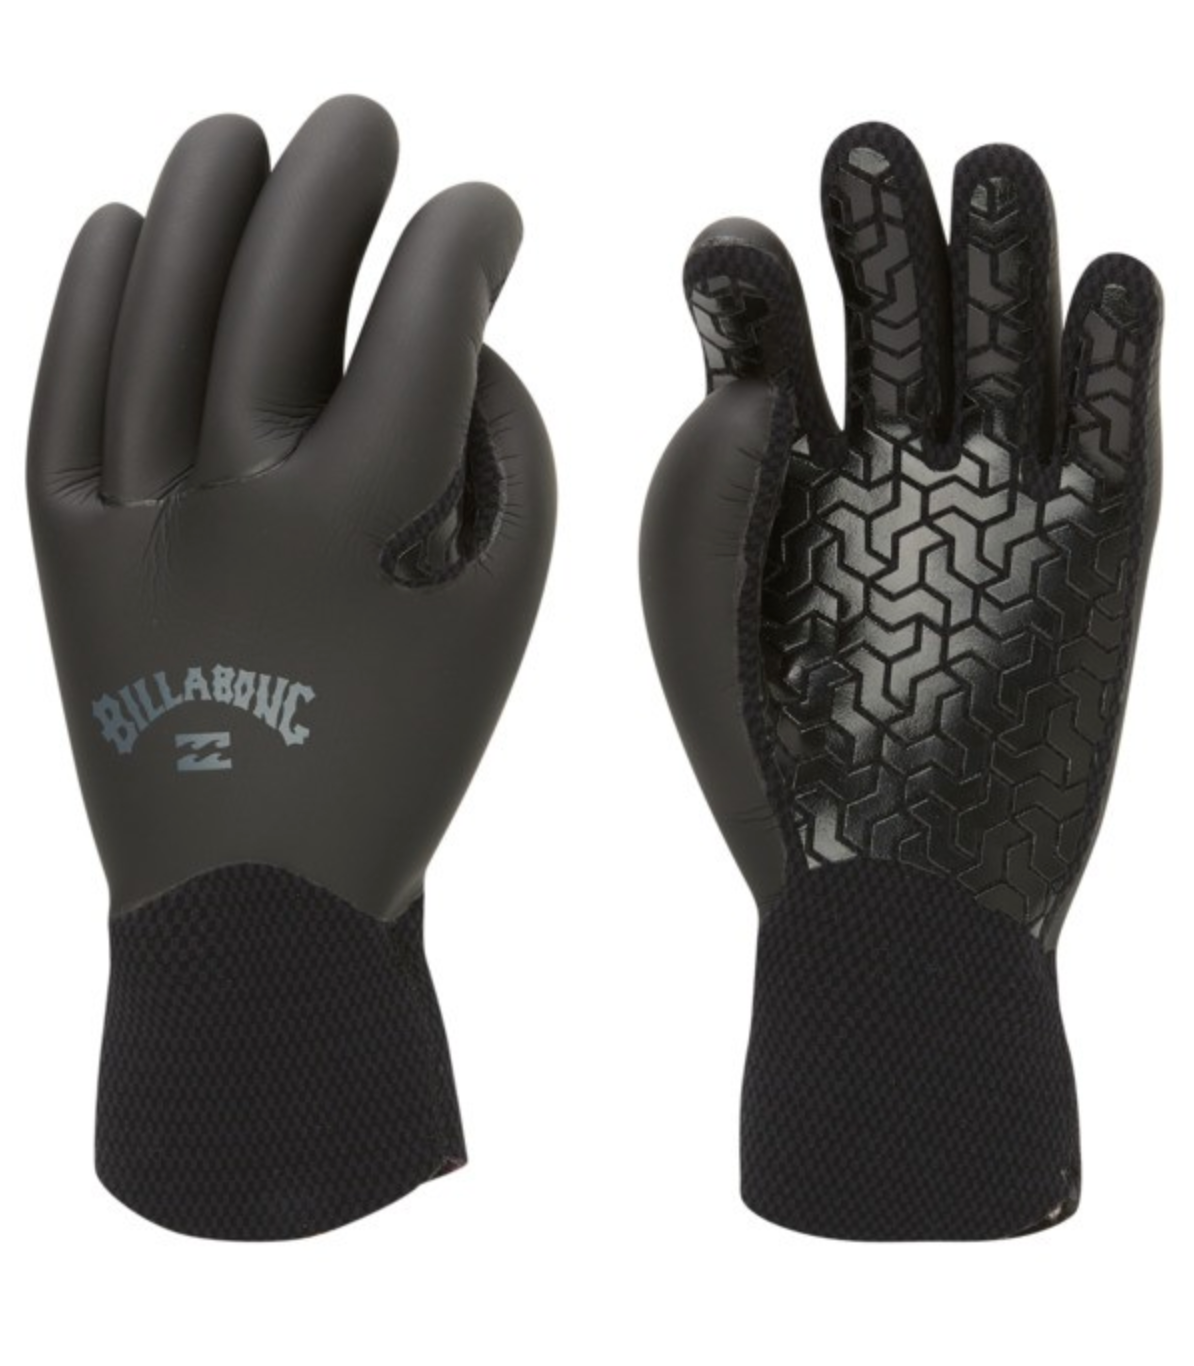 3mm Furnace Wetsuit Gloves - ATS